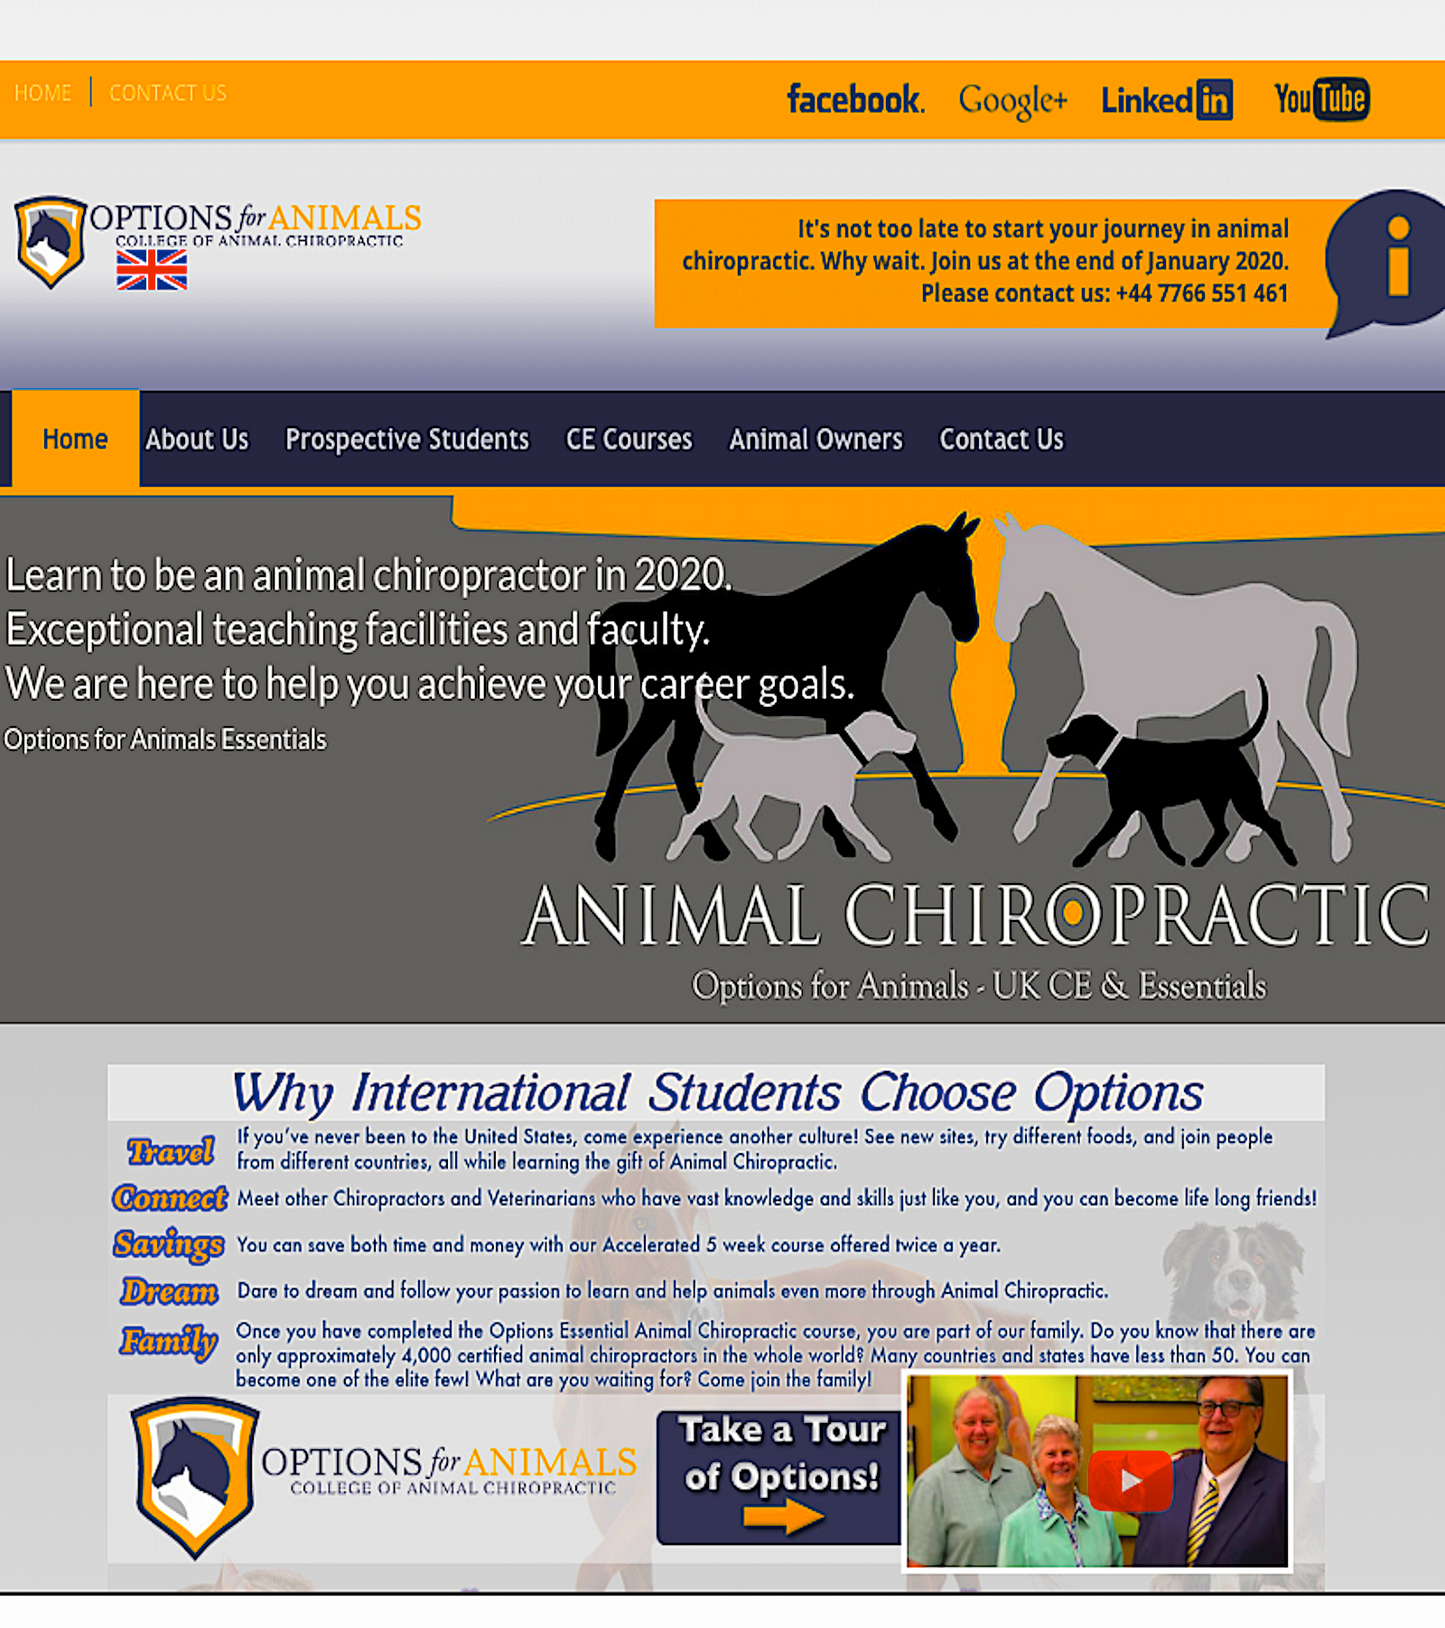 OPTIONS FOR ANIMALS COLLEGE OF ANIMAL CHIROPRACTIC